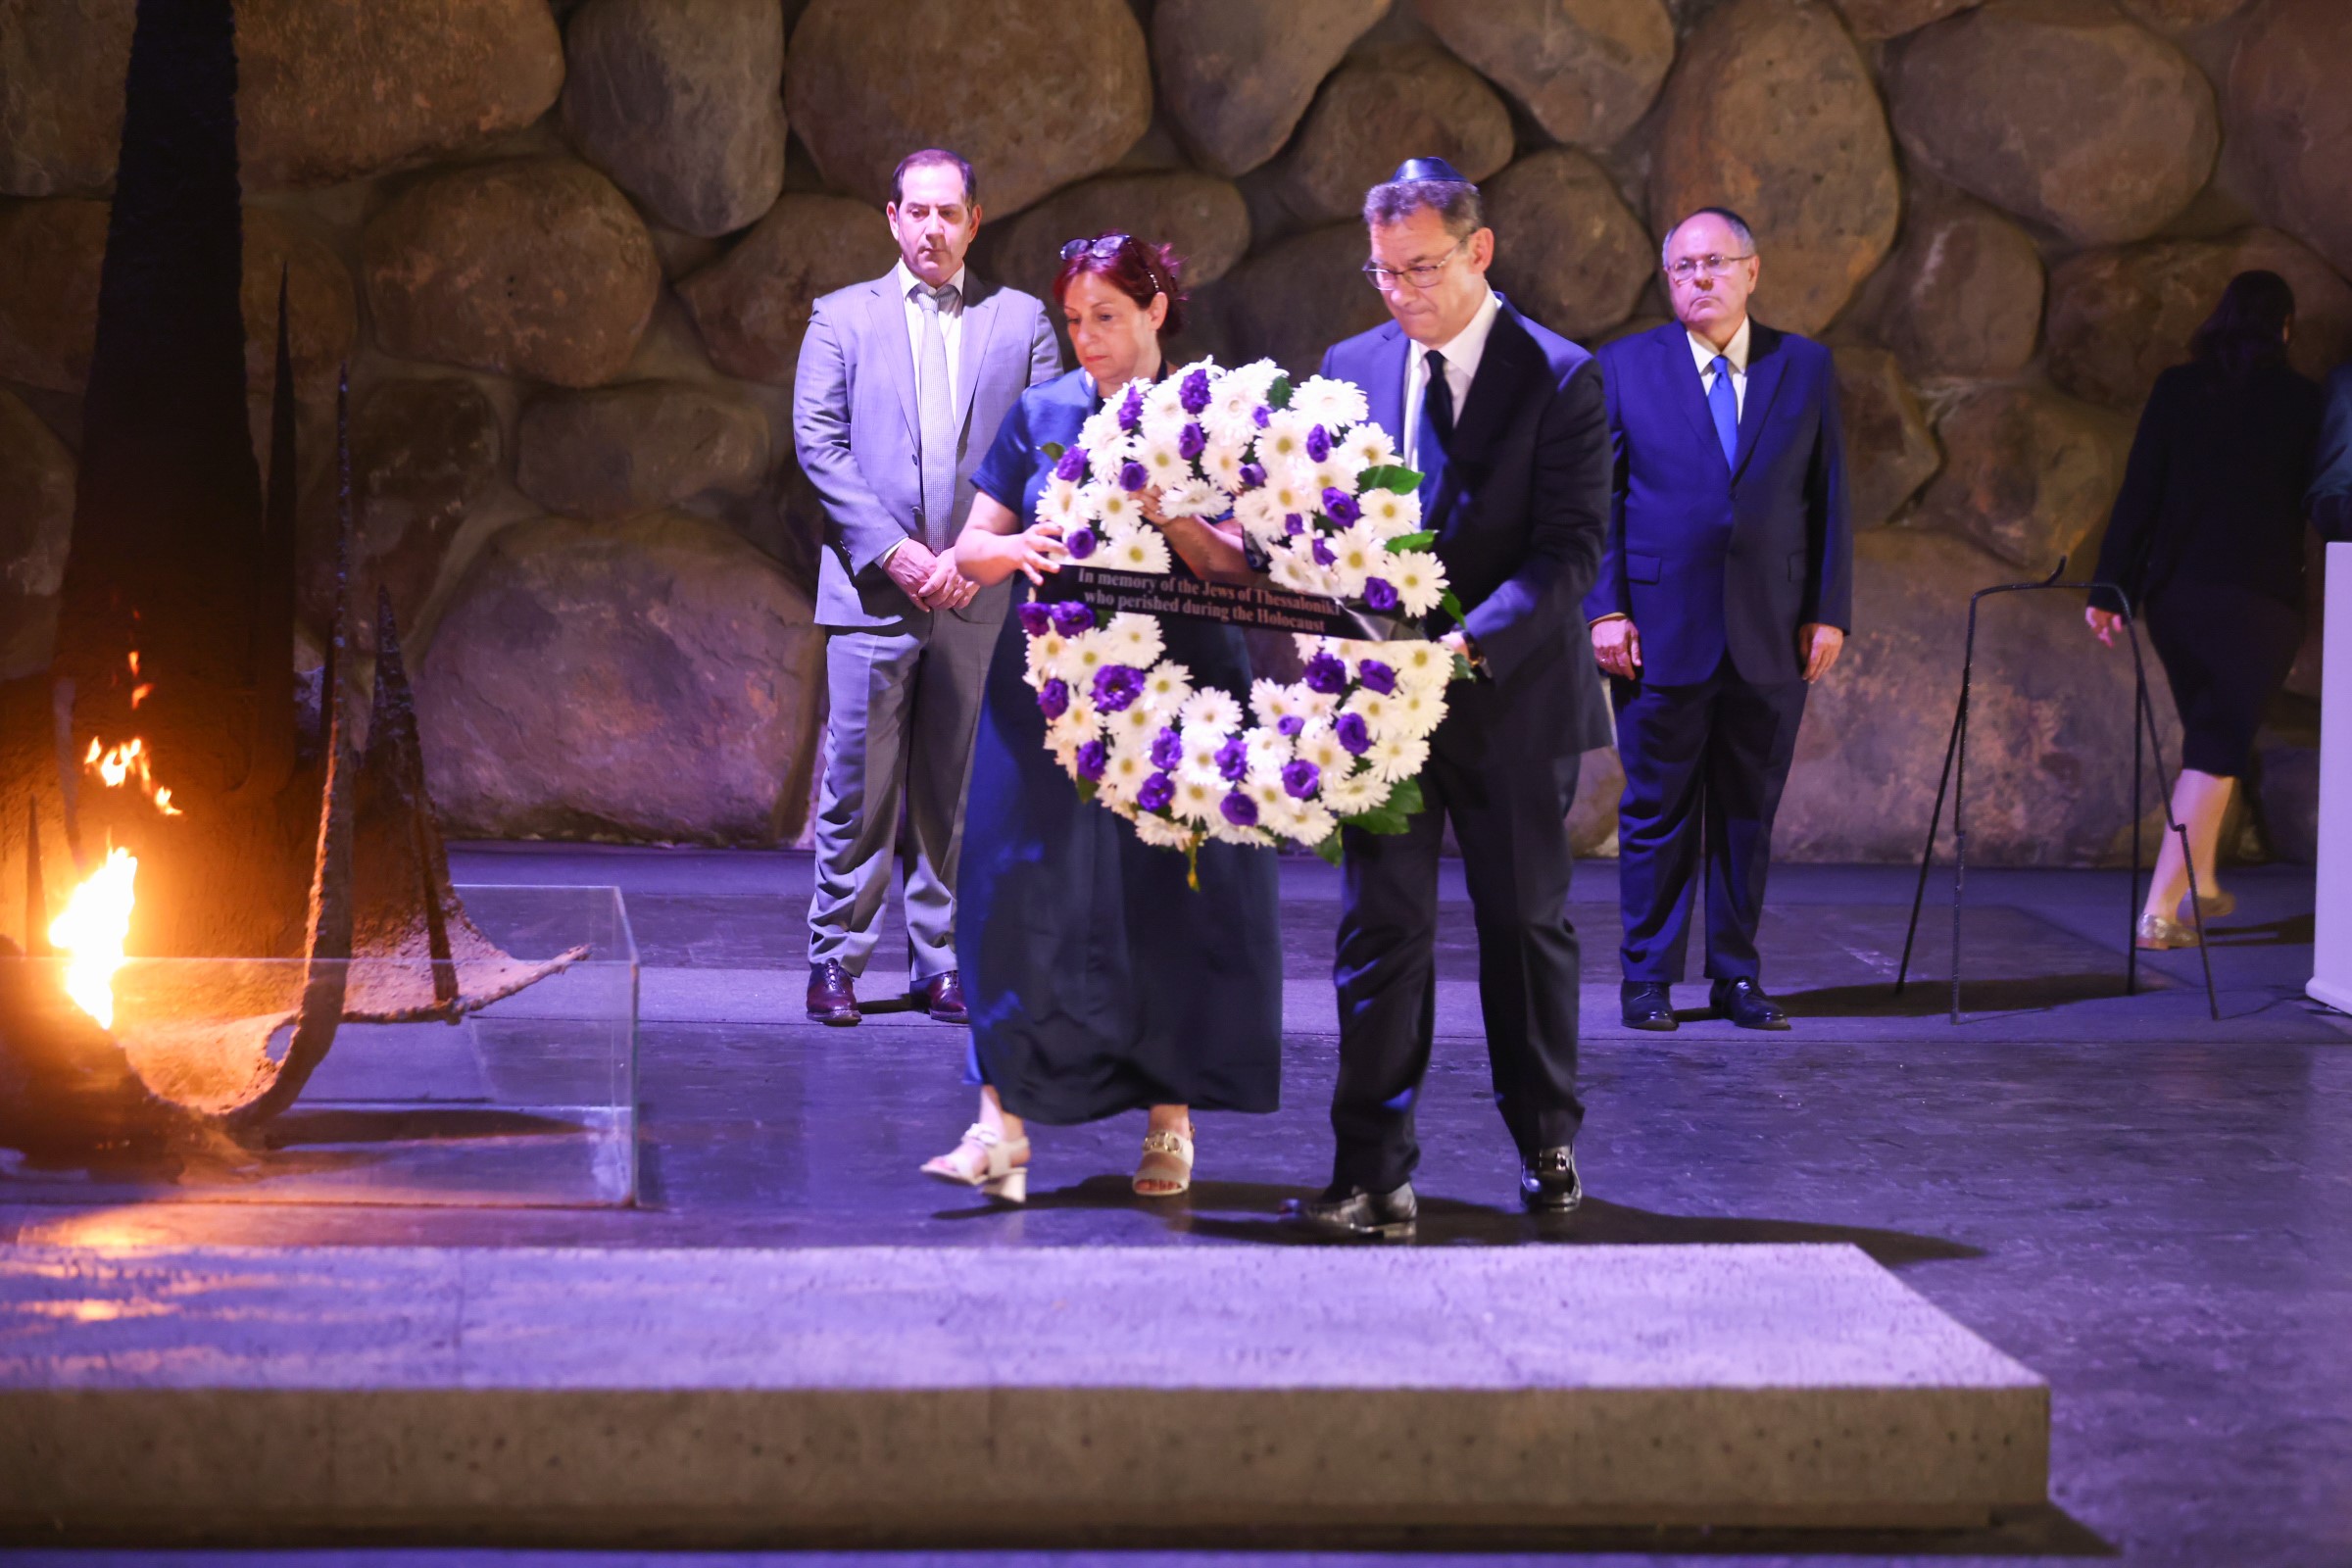 Pfizer CEO Dr. Albert Bourla and his wife Myriam participate in a memorial ceremony in the Hall of Remembrance at Yad Vashem 